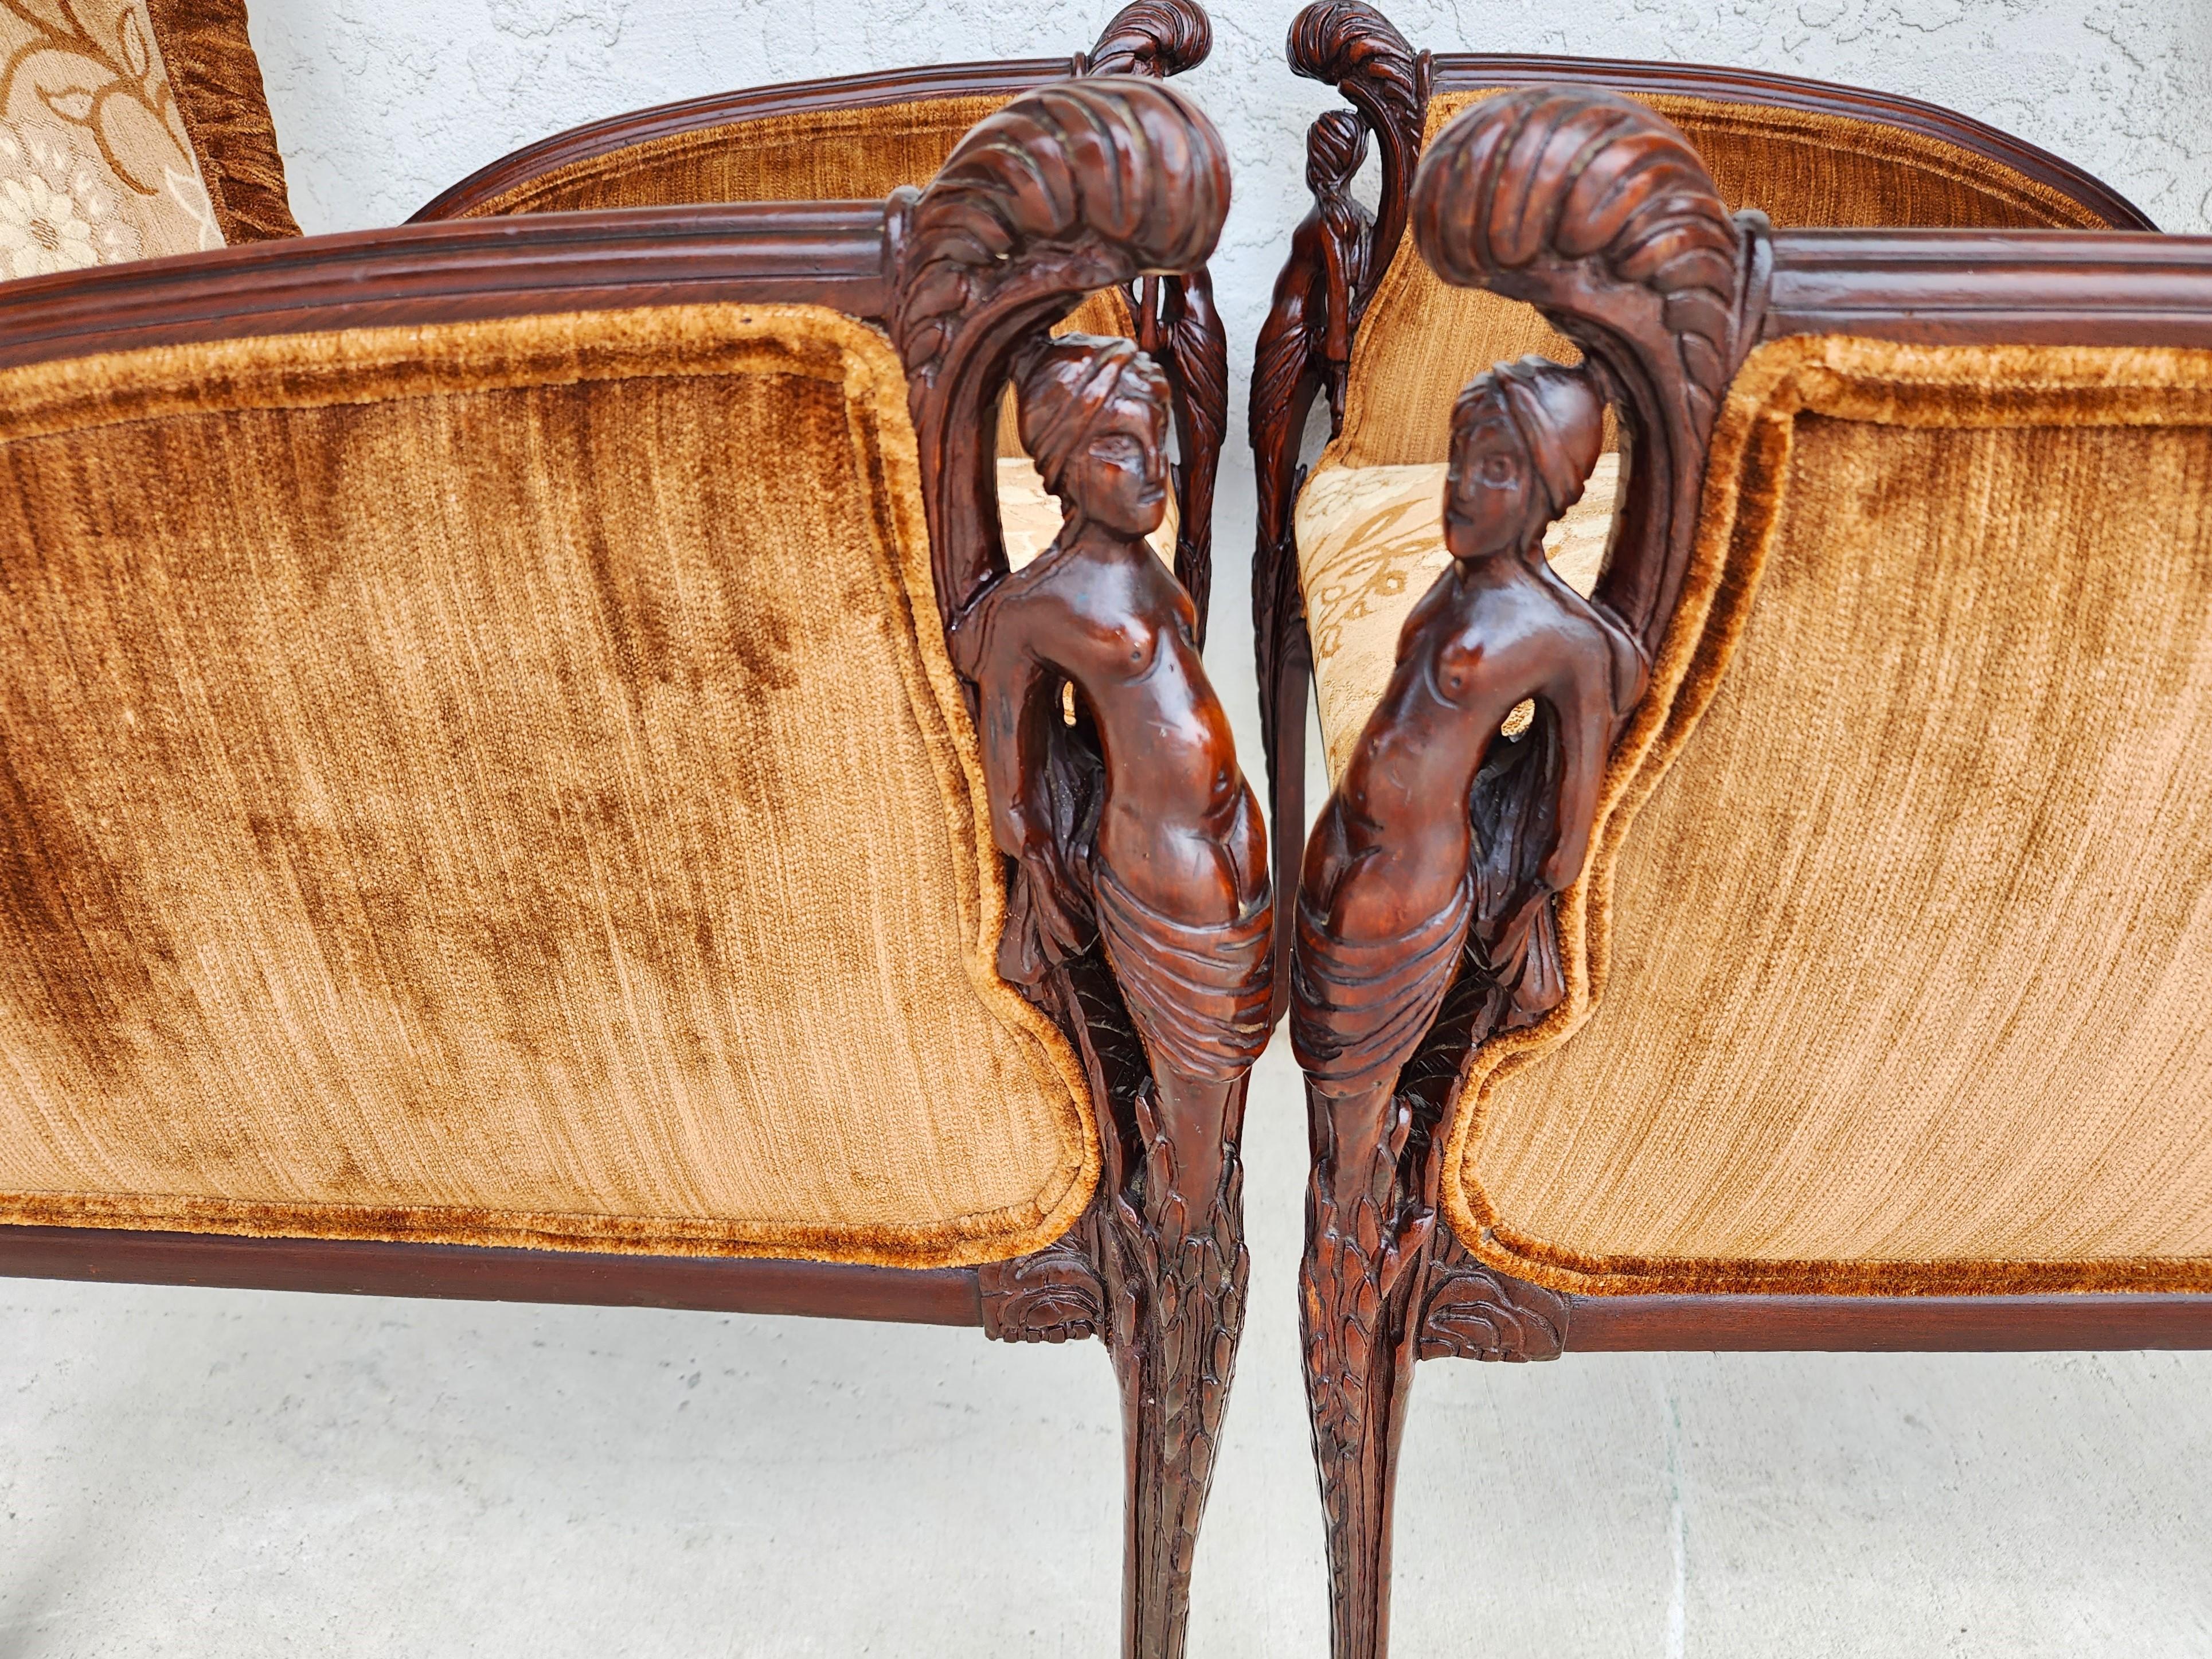 For FULL item description click on CONTINUE READING at the bottom of this page.

Offering One Of Our Recent Palm Beach Estate Fine Furniture Acquisitions Of A
Pair of GROSFELD HOUSE Armchairs in Walnut with Female Nude Carvings Adorning the Fronts